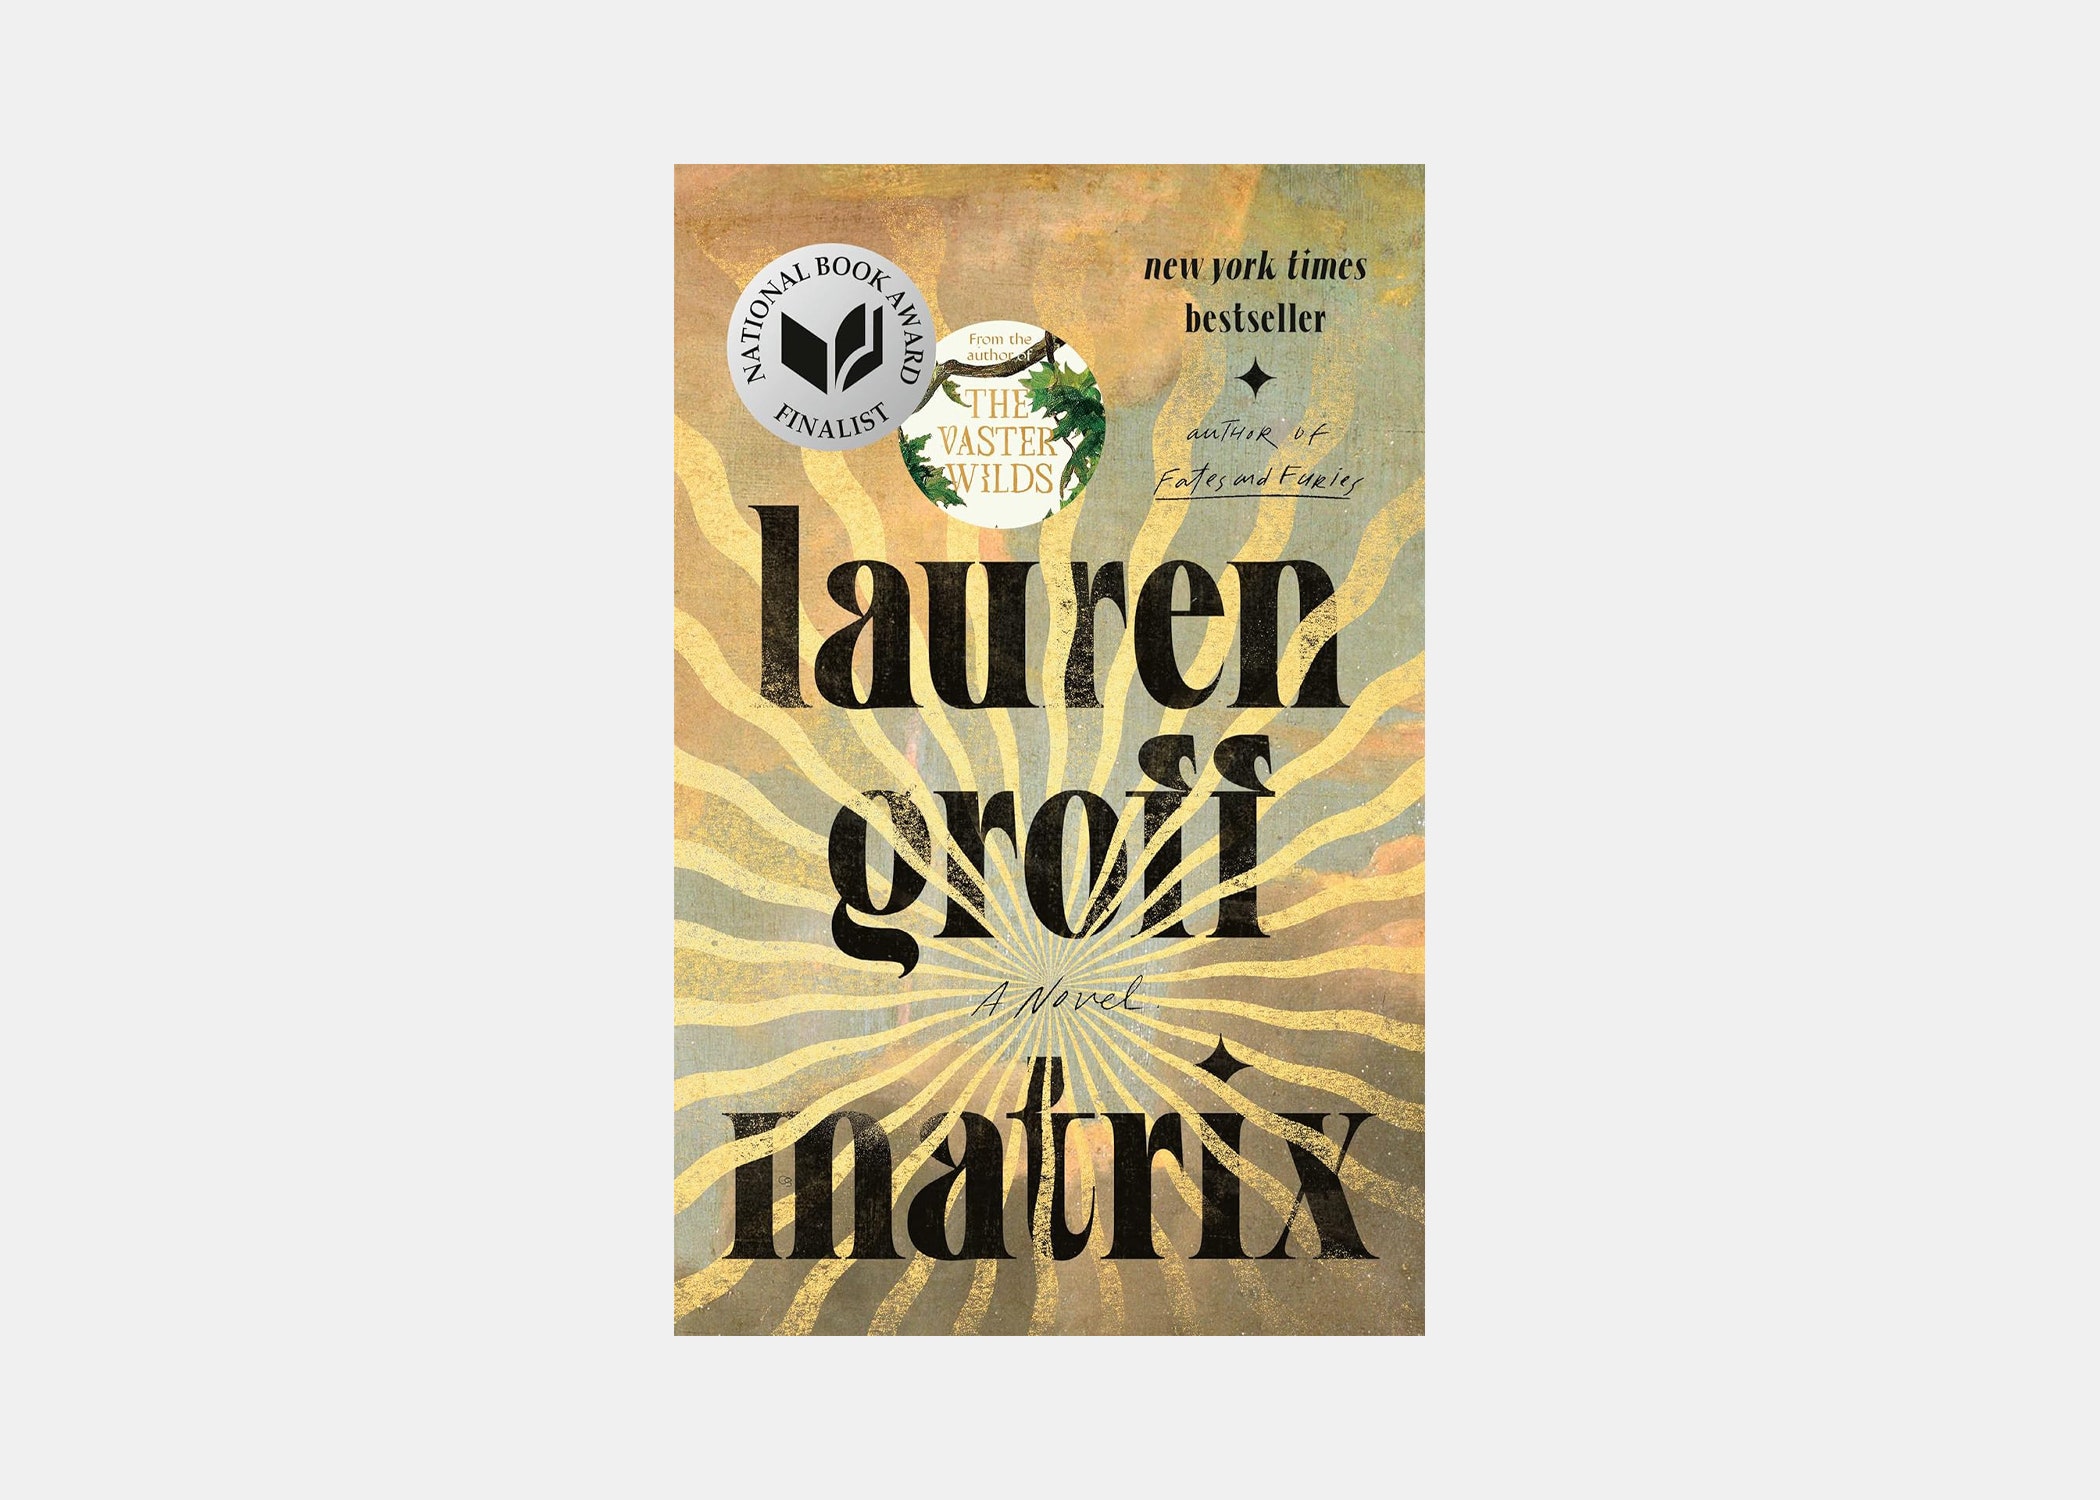 <p><strong>What it’s about:</strong> For more novels based in this era of Anglo-Franco history, pick up a copy of Lauren Groff’s <em>Matrix</em>, in which Eleanor steals the spotlight by being extremely beautiful and deliciously frightening. That said, this story revolves instead around Marie de France, a 12th-century poet about whom extremely little is known—which gives Groff plenty of room for a radical reimagining of Marie's life as the prioress of a royal abbey who grows to lead and protect a community of women, awakening to the world and all its sensations. This is Groff's writing at its most electric and sensual, giving us a book for all seasons. I implore you: Read it now.</p> <p><strong>You should read this when:</strong> You’re itching to read one of the greatest American writers working today take on a historical figure and give her story a feminist and inventive spin</p> <p><strong>The book’s opening lines:</strong> “She rides out of the forest alone. Seventeen years old, in the cold March drizzle, Marie who comes from France. It is 1158 and the world bears the weariness of late Lent. Soon it will be Easter, which arrives early this year. In the fields, the seeds uncurl in the dark cold soil, ready to punch into the freer air.”</p> $6, Amazon. <a href="https://www.amazon.com/Matrix-A-Novel/dp/B08X129G7X/ref=sr_1_1">Get it now!</a><p>Sign up to receive the latest news, expert tips, and inspiration on all things travel</p><a href="https://www.cntraveler.com/newsletter/the-daily?sourceCode=msnsend">Inspire Me</a>